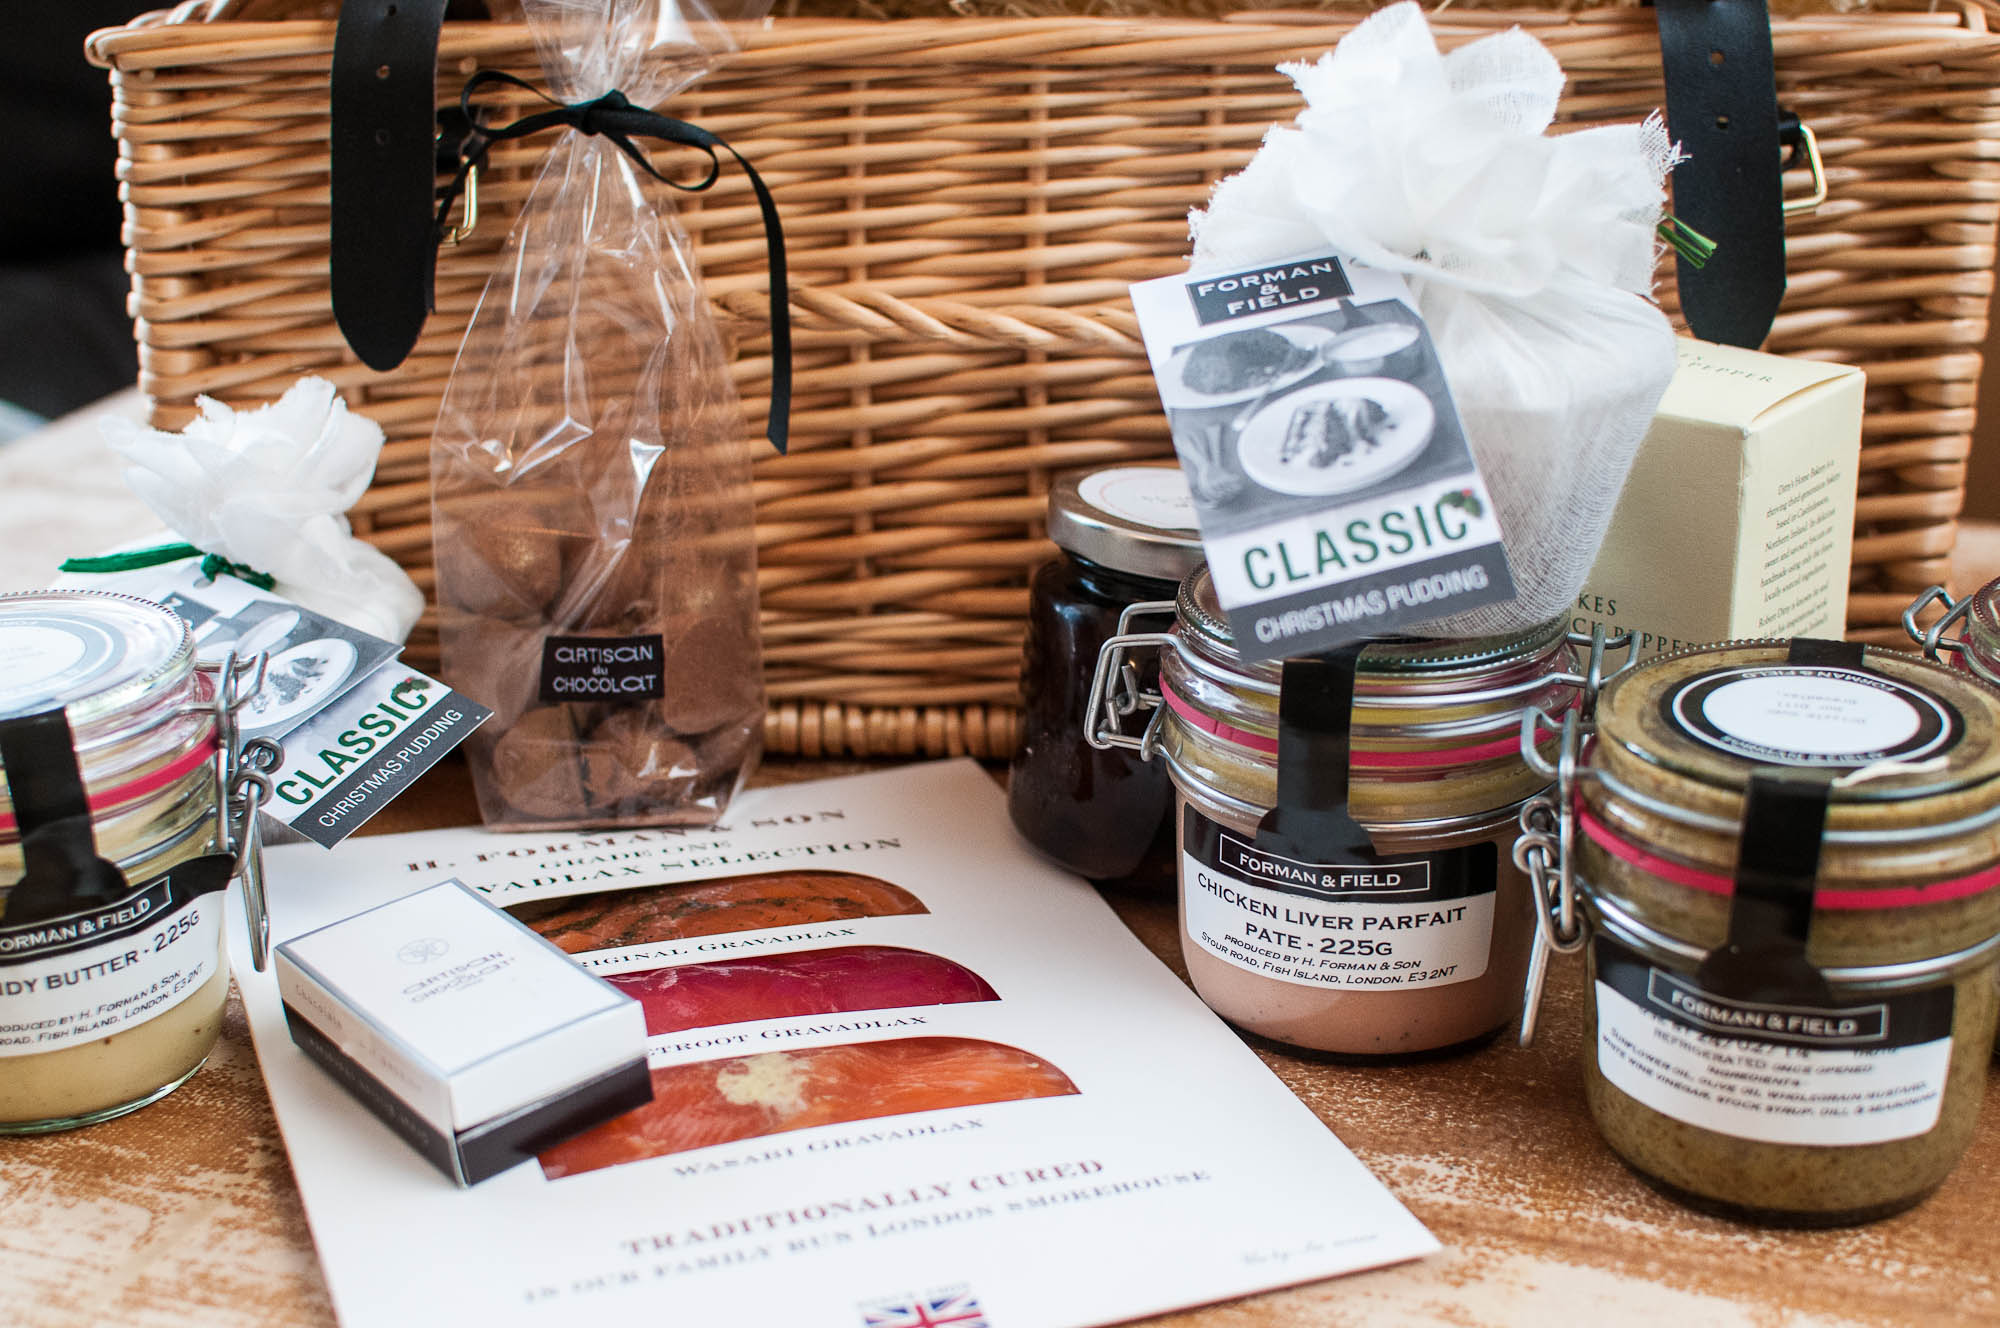 Review: Forman & Field Hamper for Two